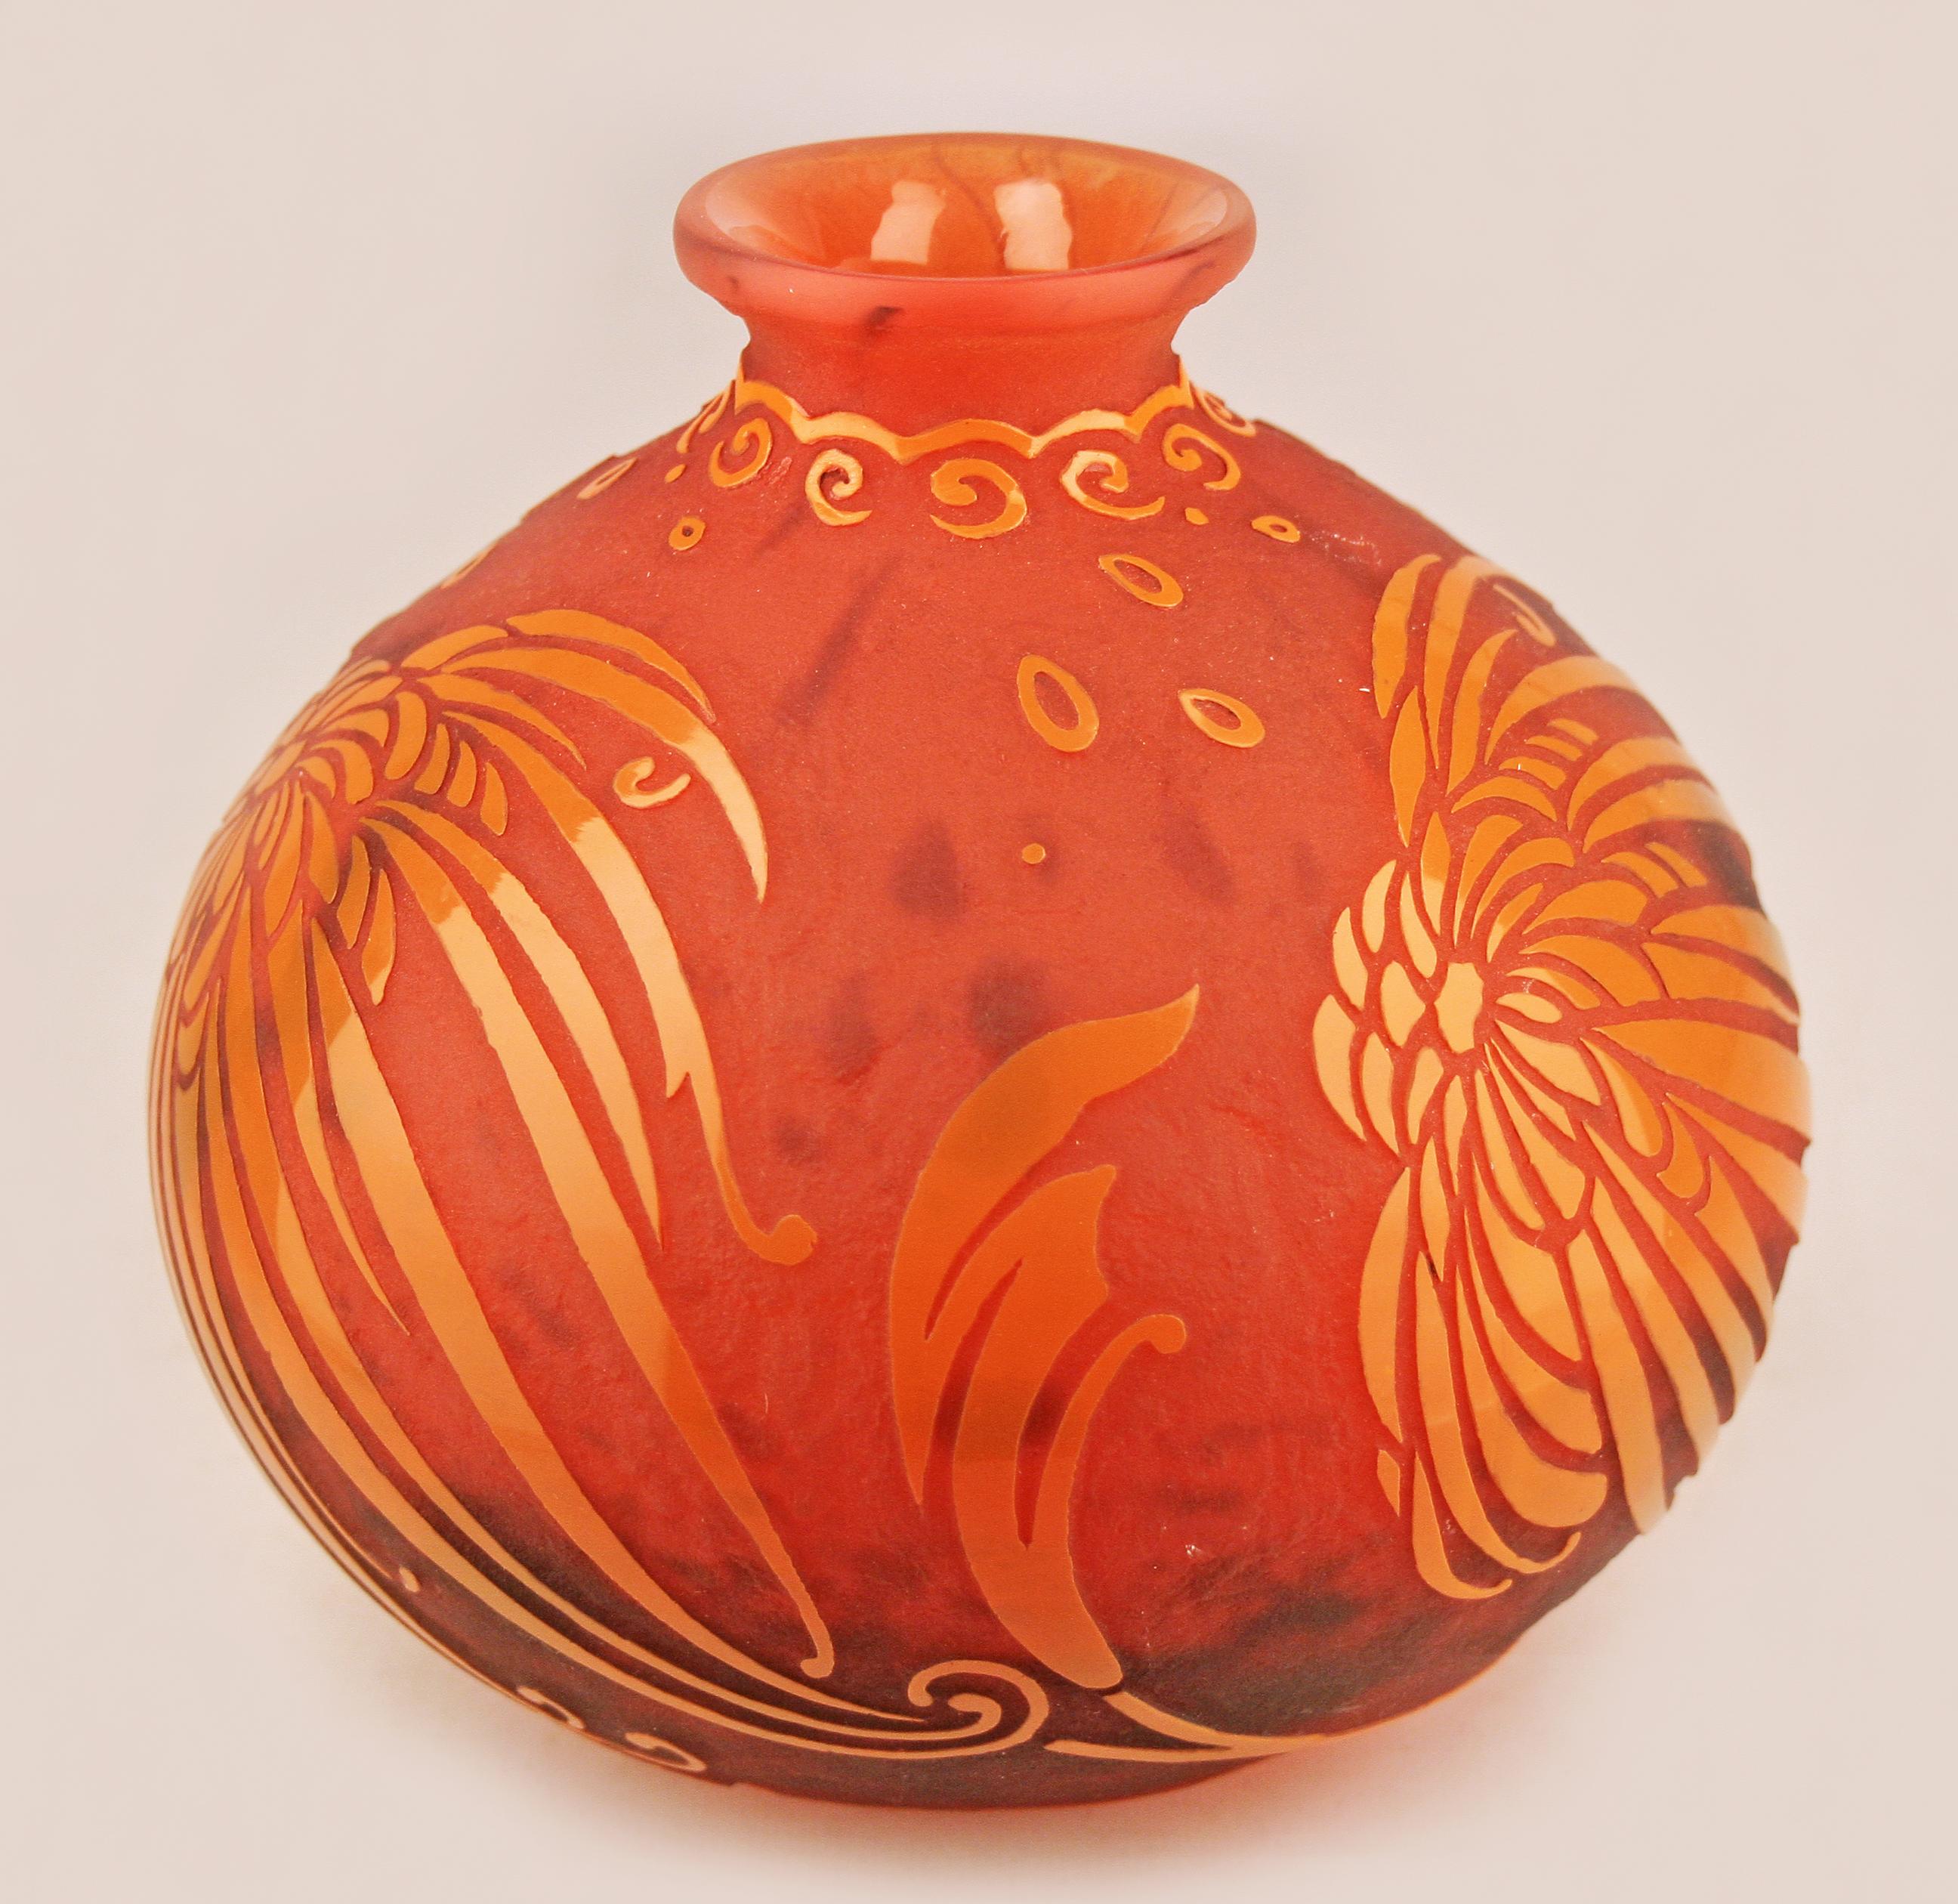 Daum Nancy enamel glass
Art deco style (flowers)
Origin France Circa 1920
Acid carving and enamelling technique
Excellent condition
Orange predominates
Signed at its base
Daum is a crystal studio based in Nancy, France, founded in 1878 by Jean Daum